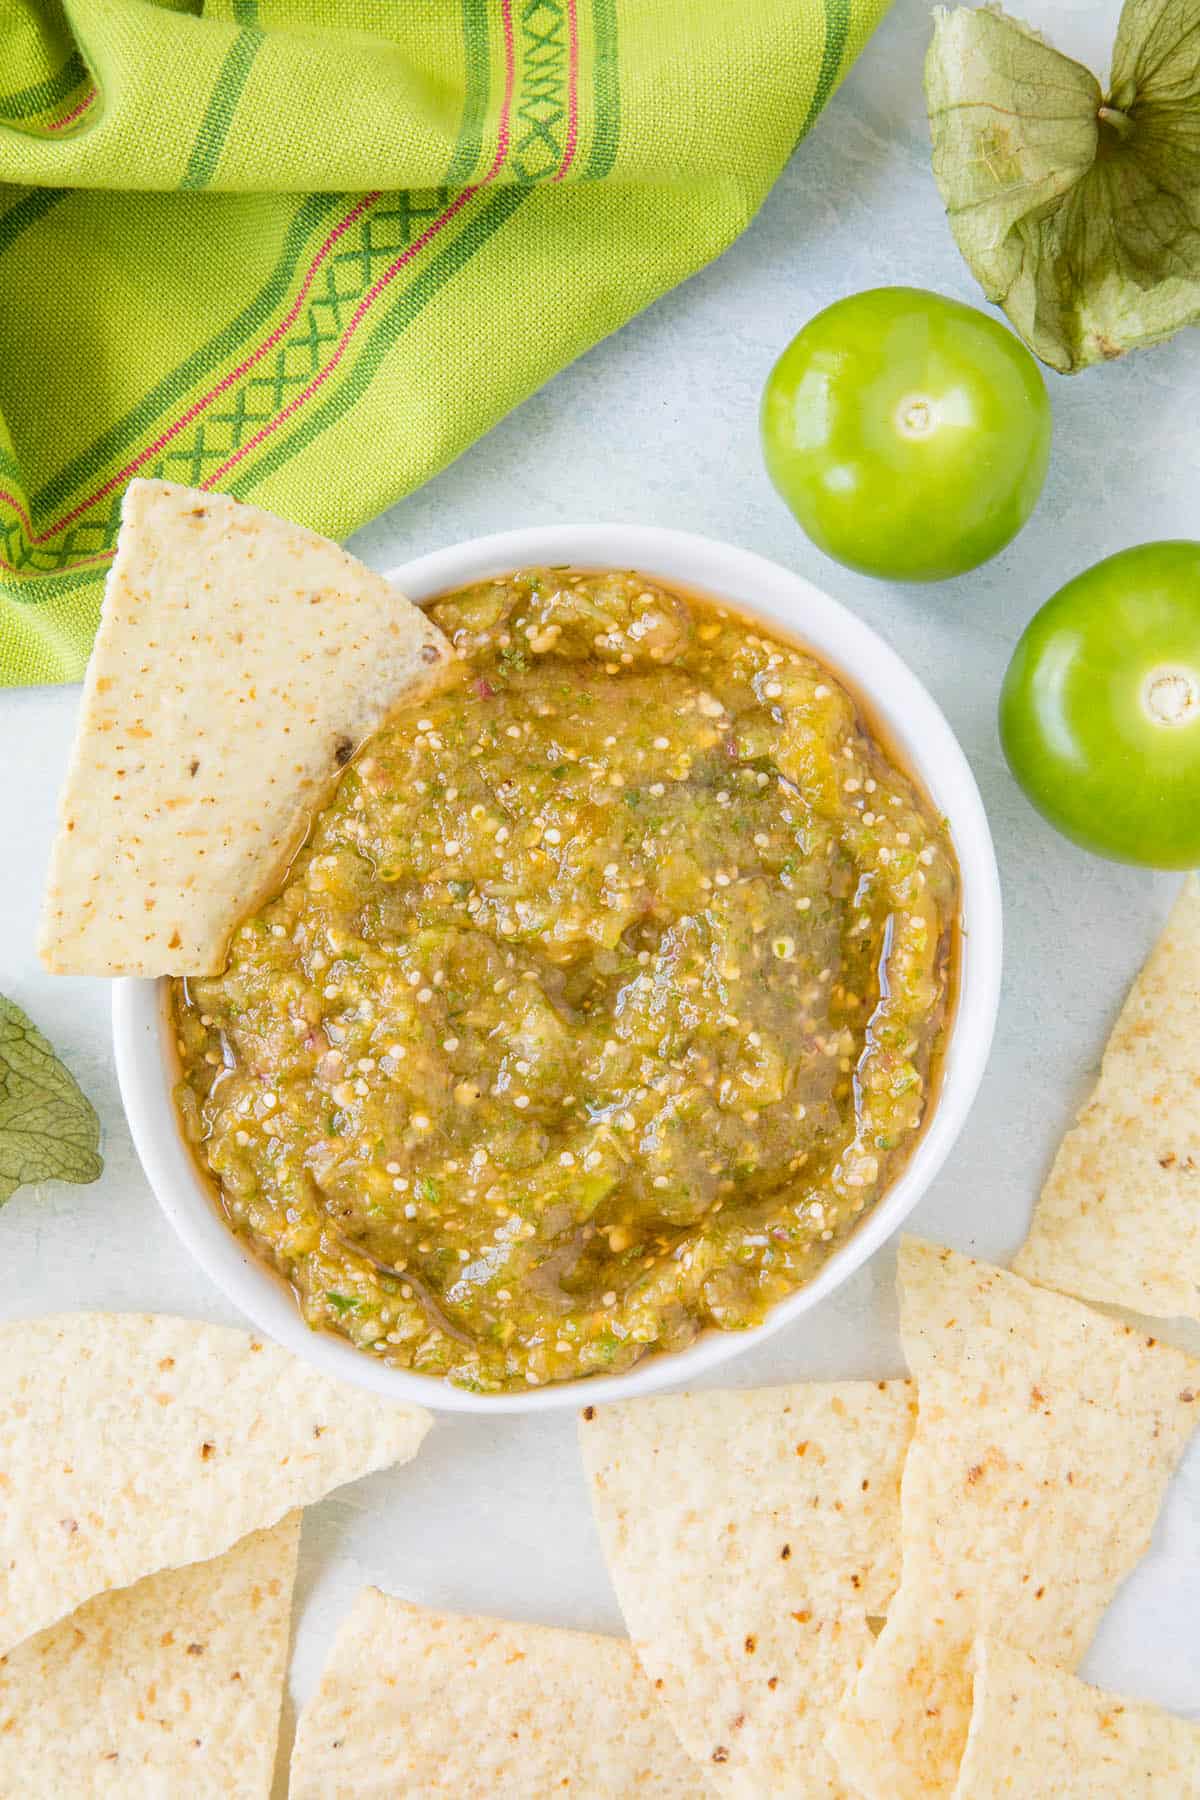 Salsa verde in a bowl with a chip